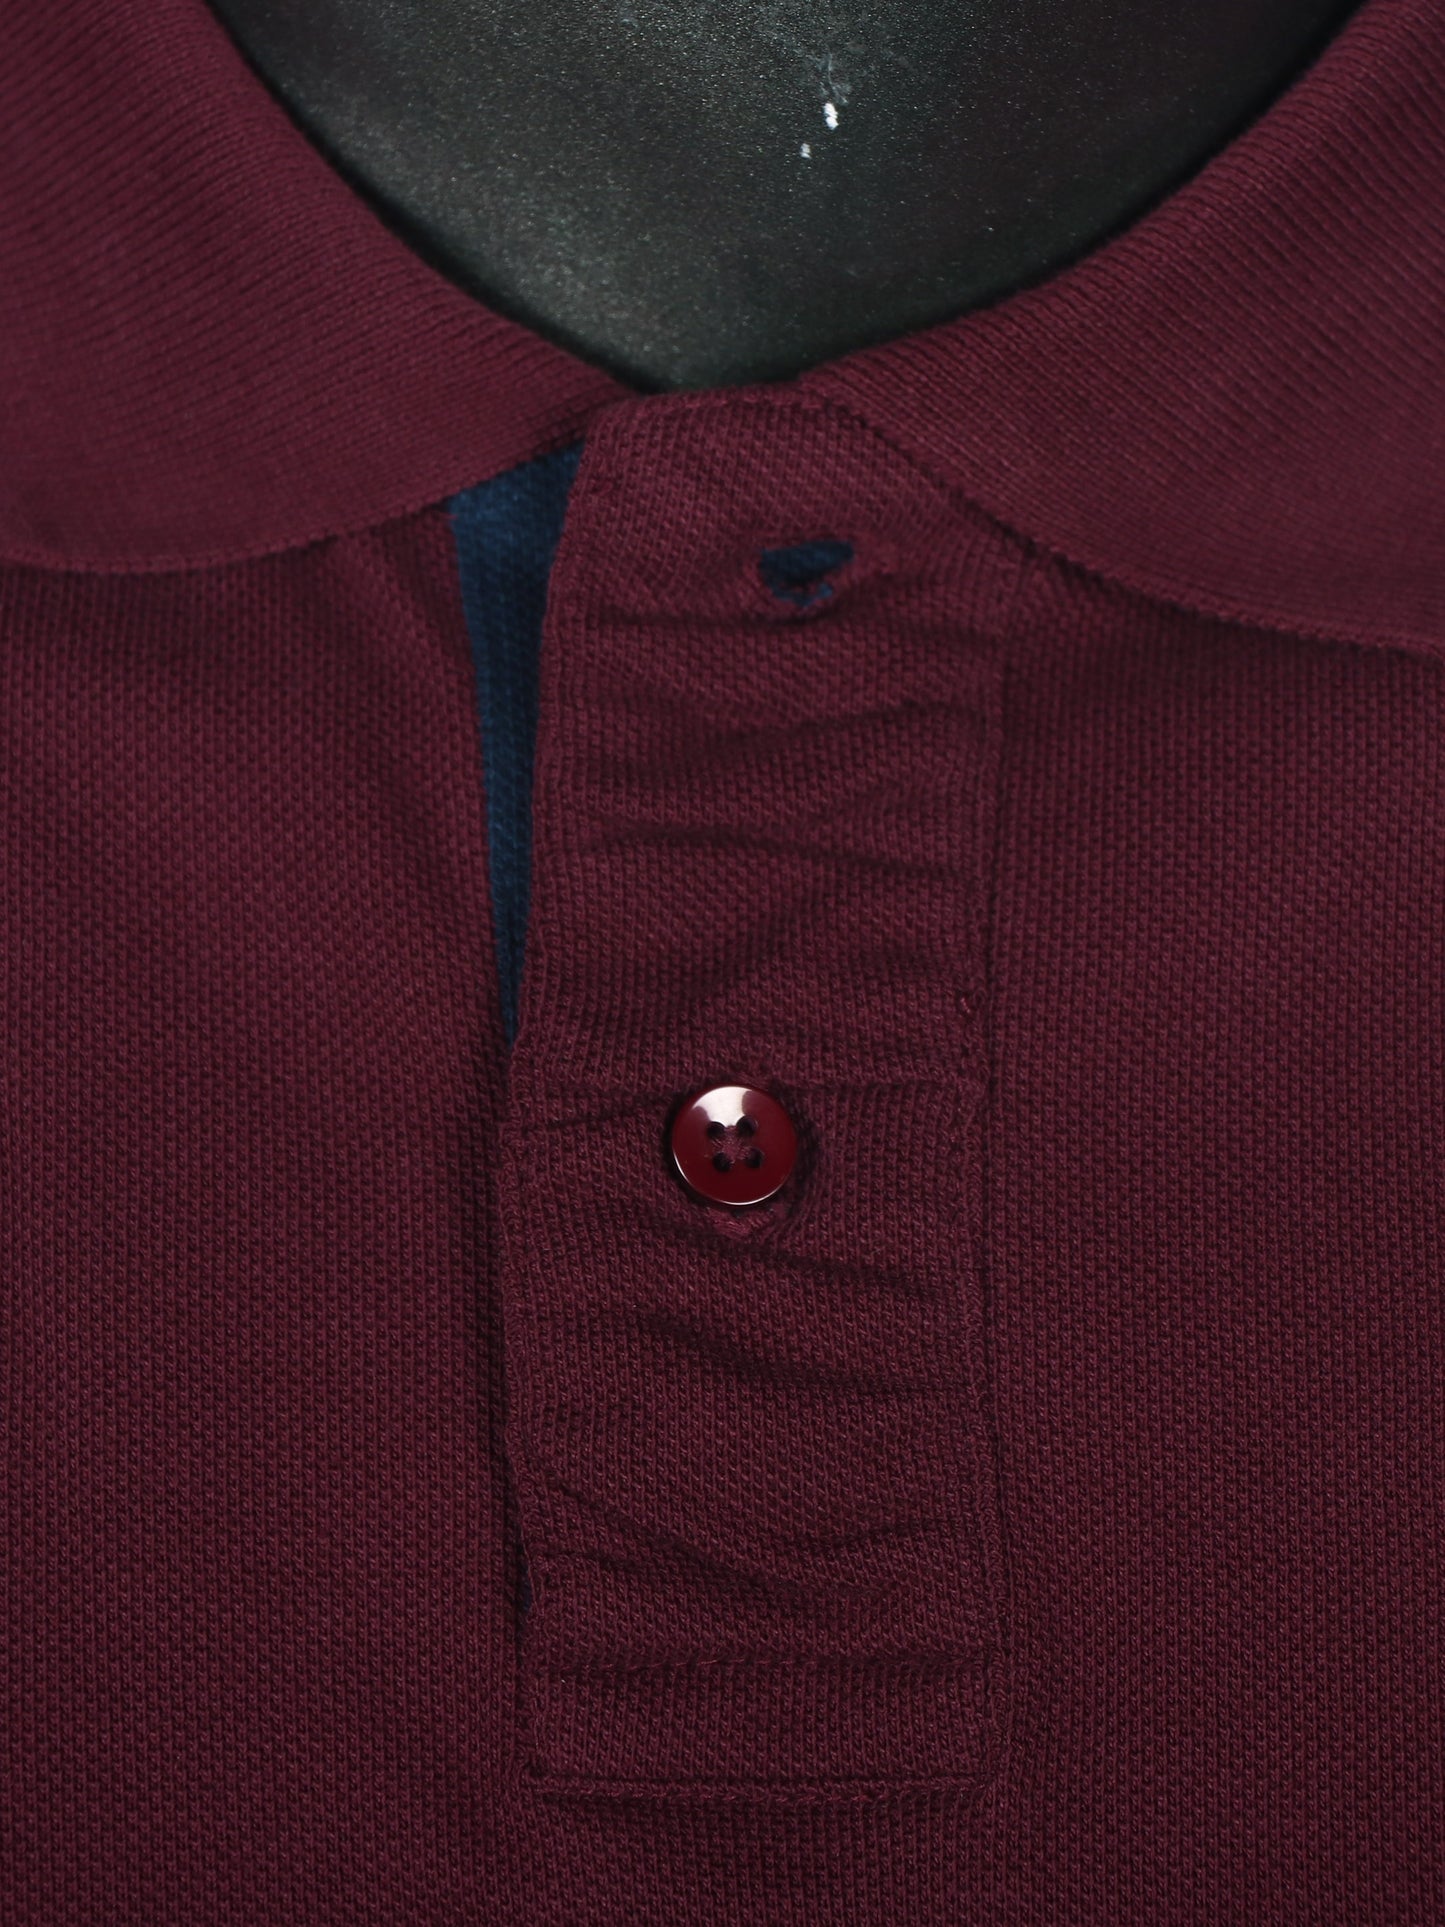 Slim Fit Wine Red Color Polo T-Shirt in pique fabric